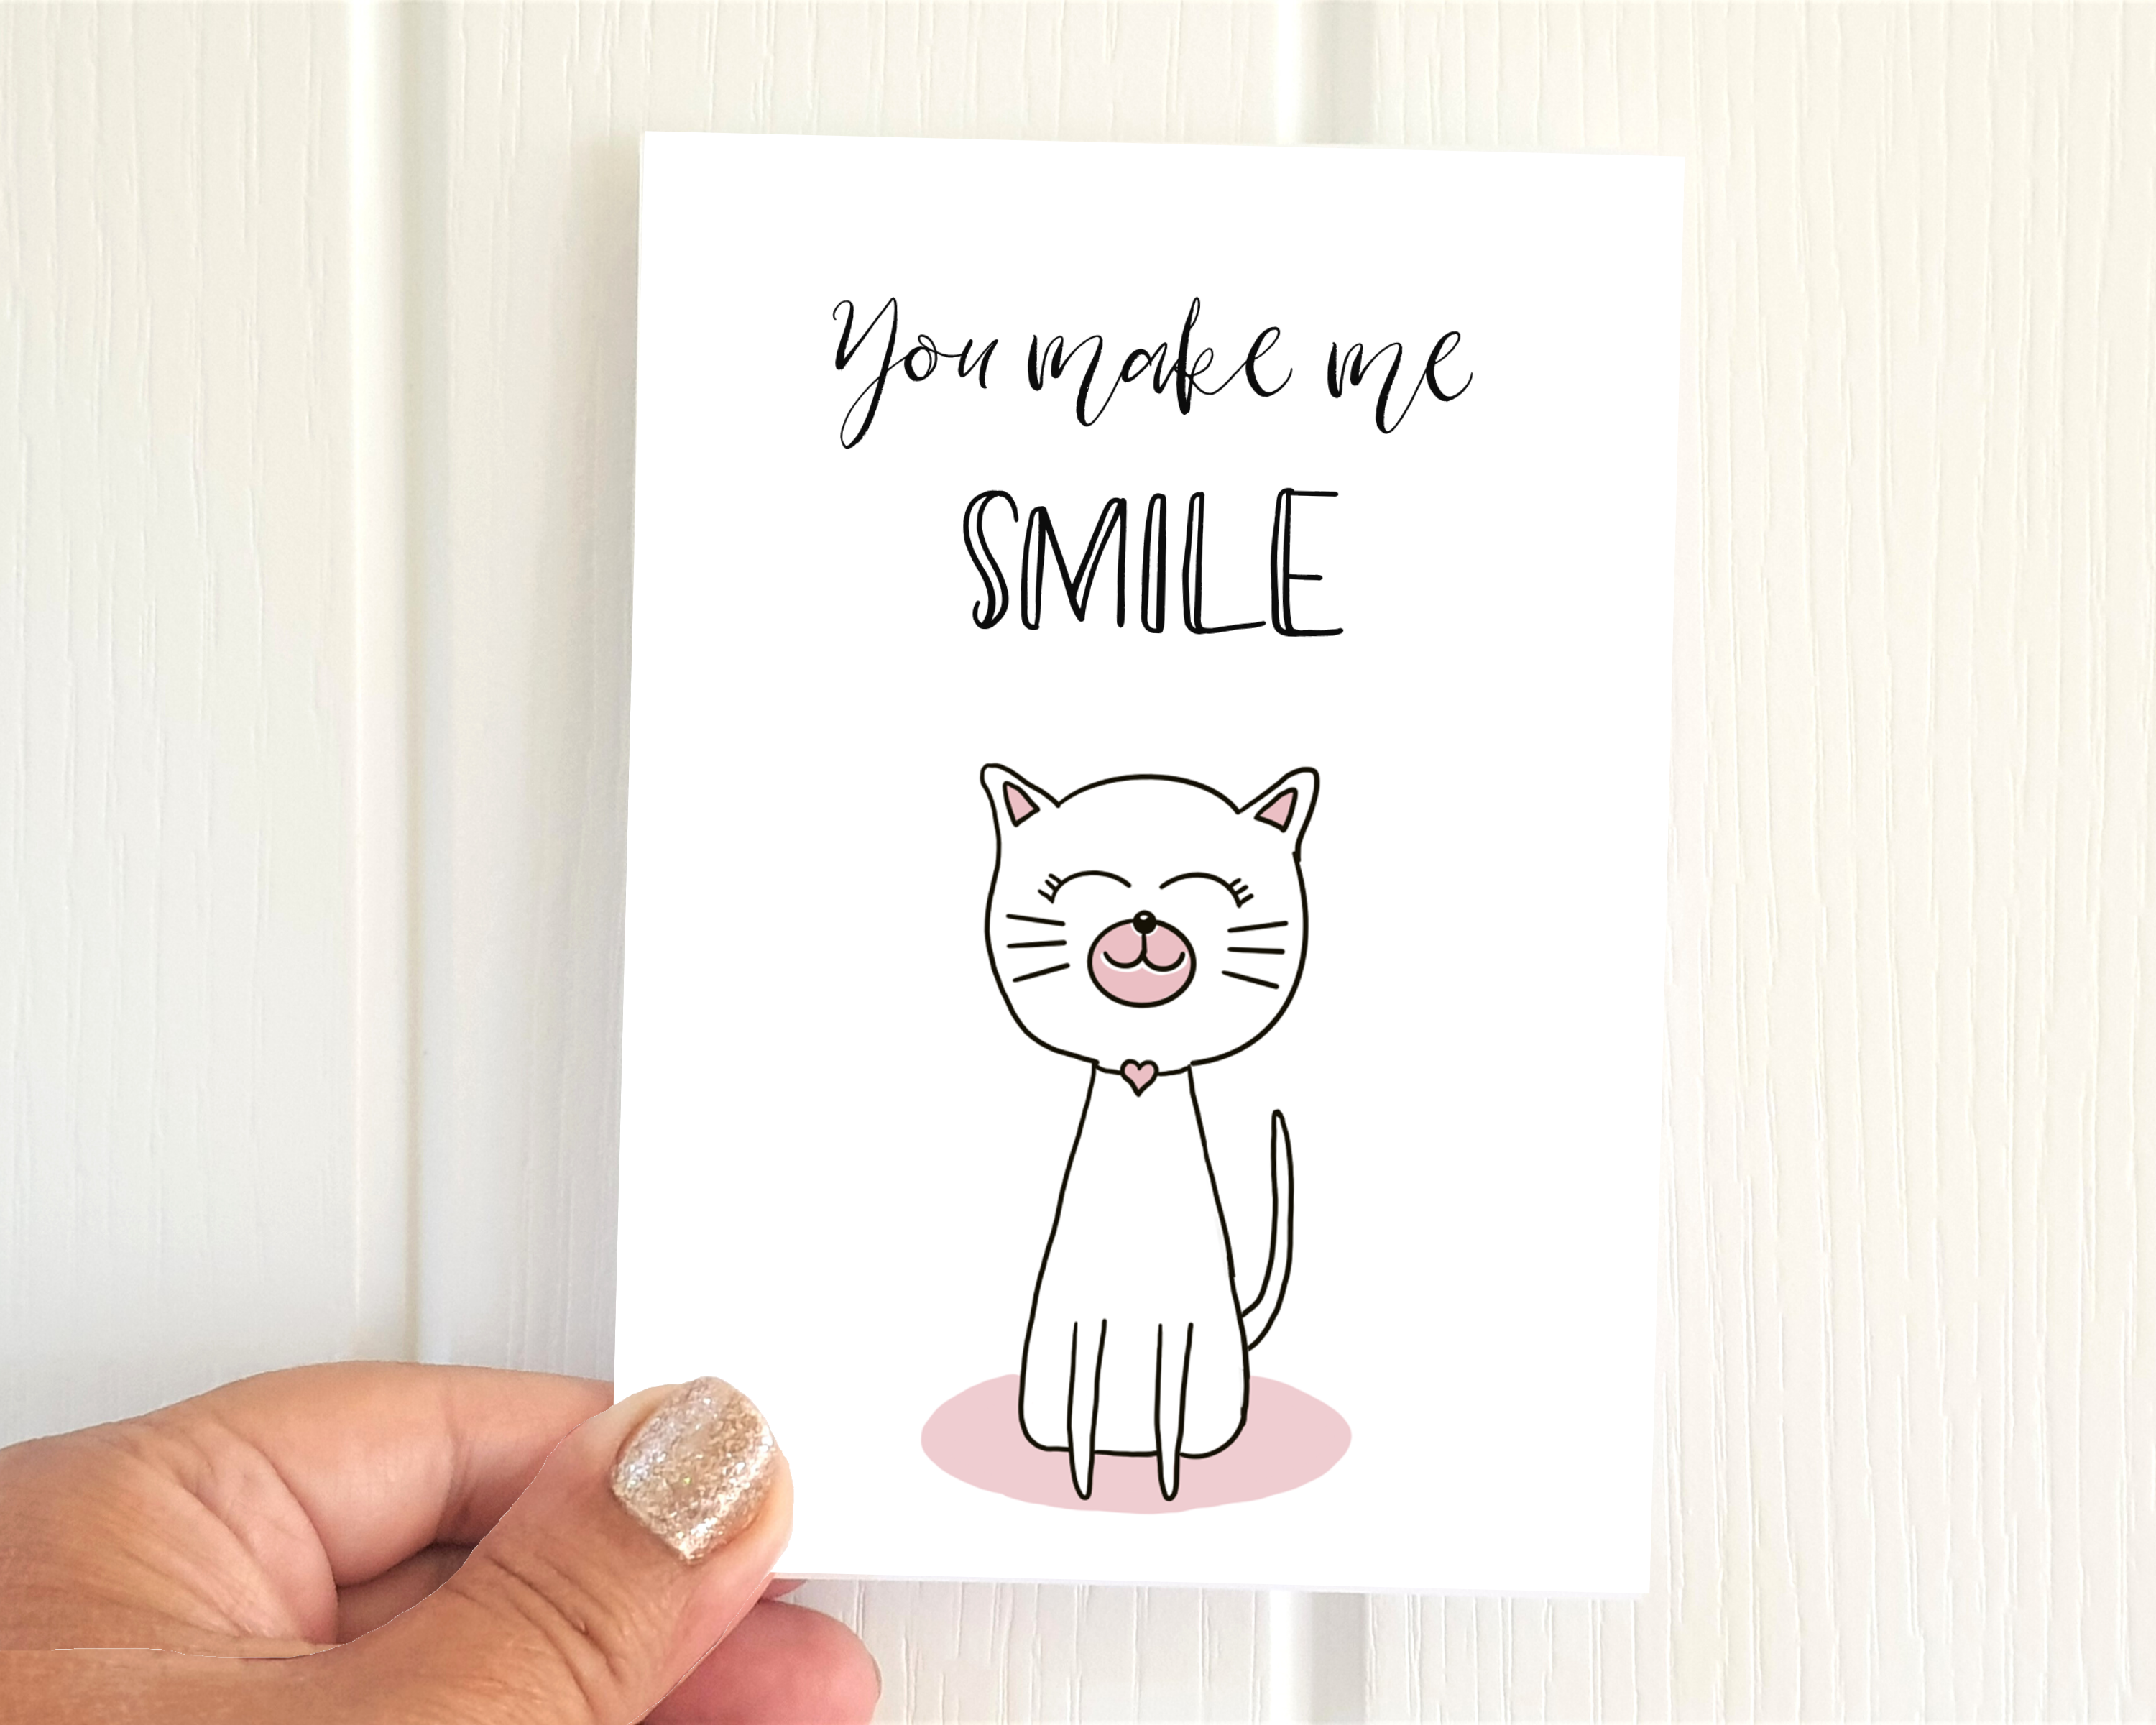 Poppleberry A6 folded greetings card, with a smiling white cat illustration, on white cardstock, size compared with hand.